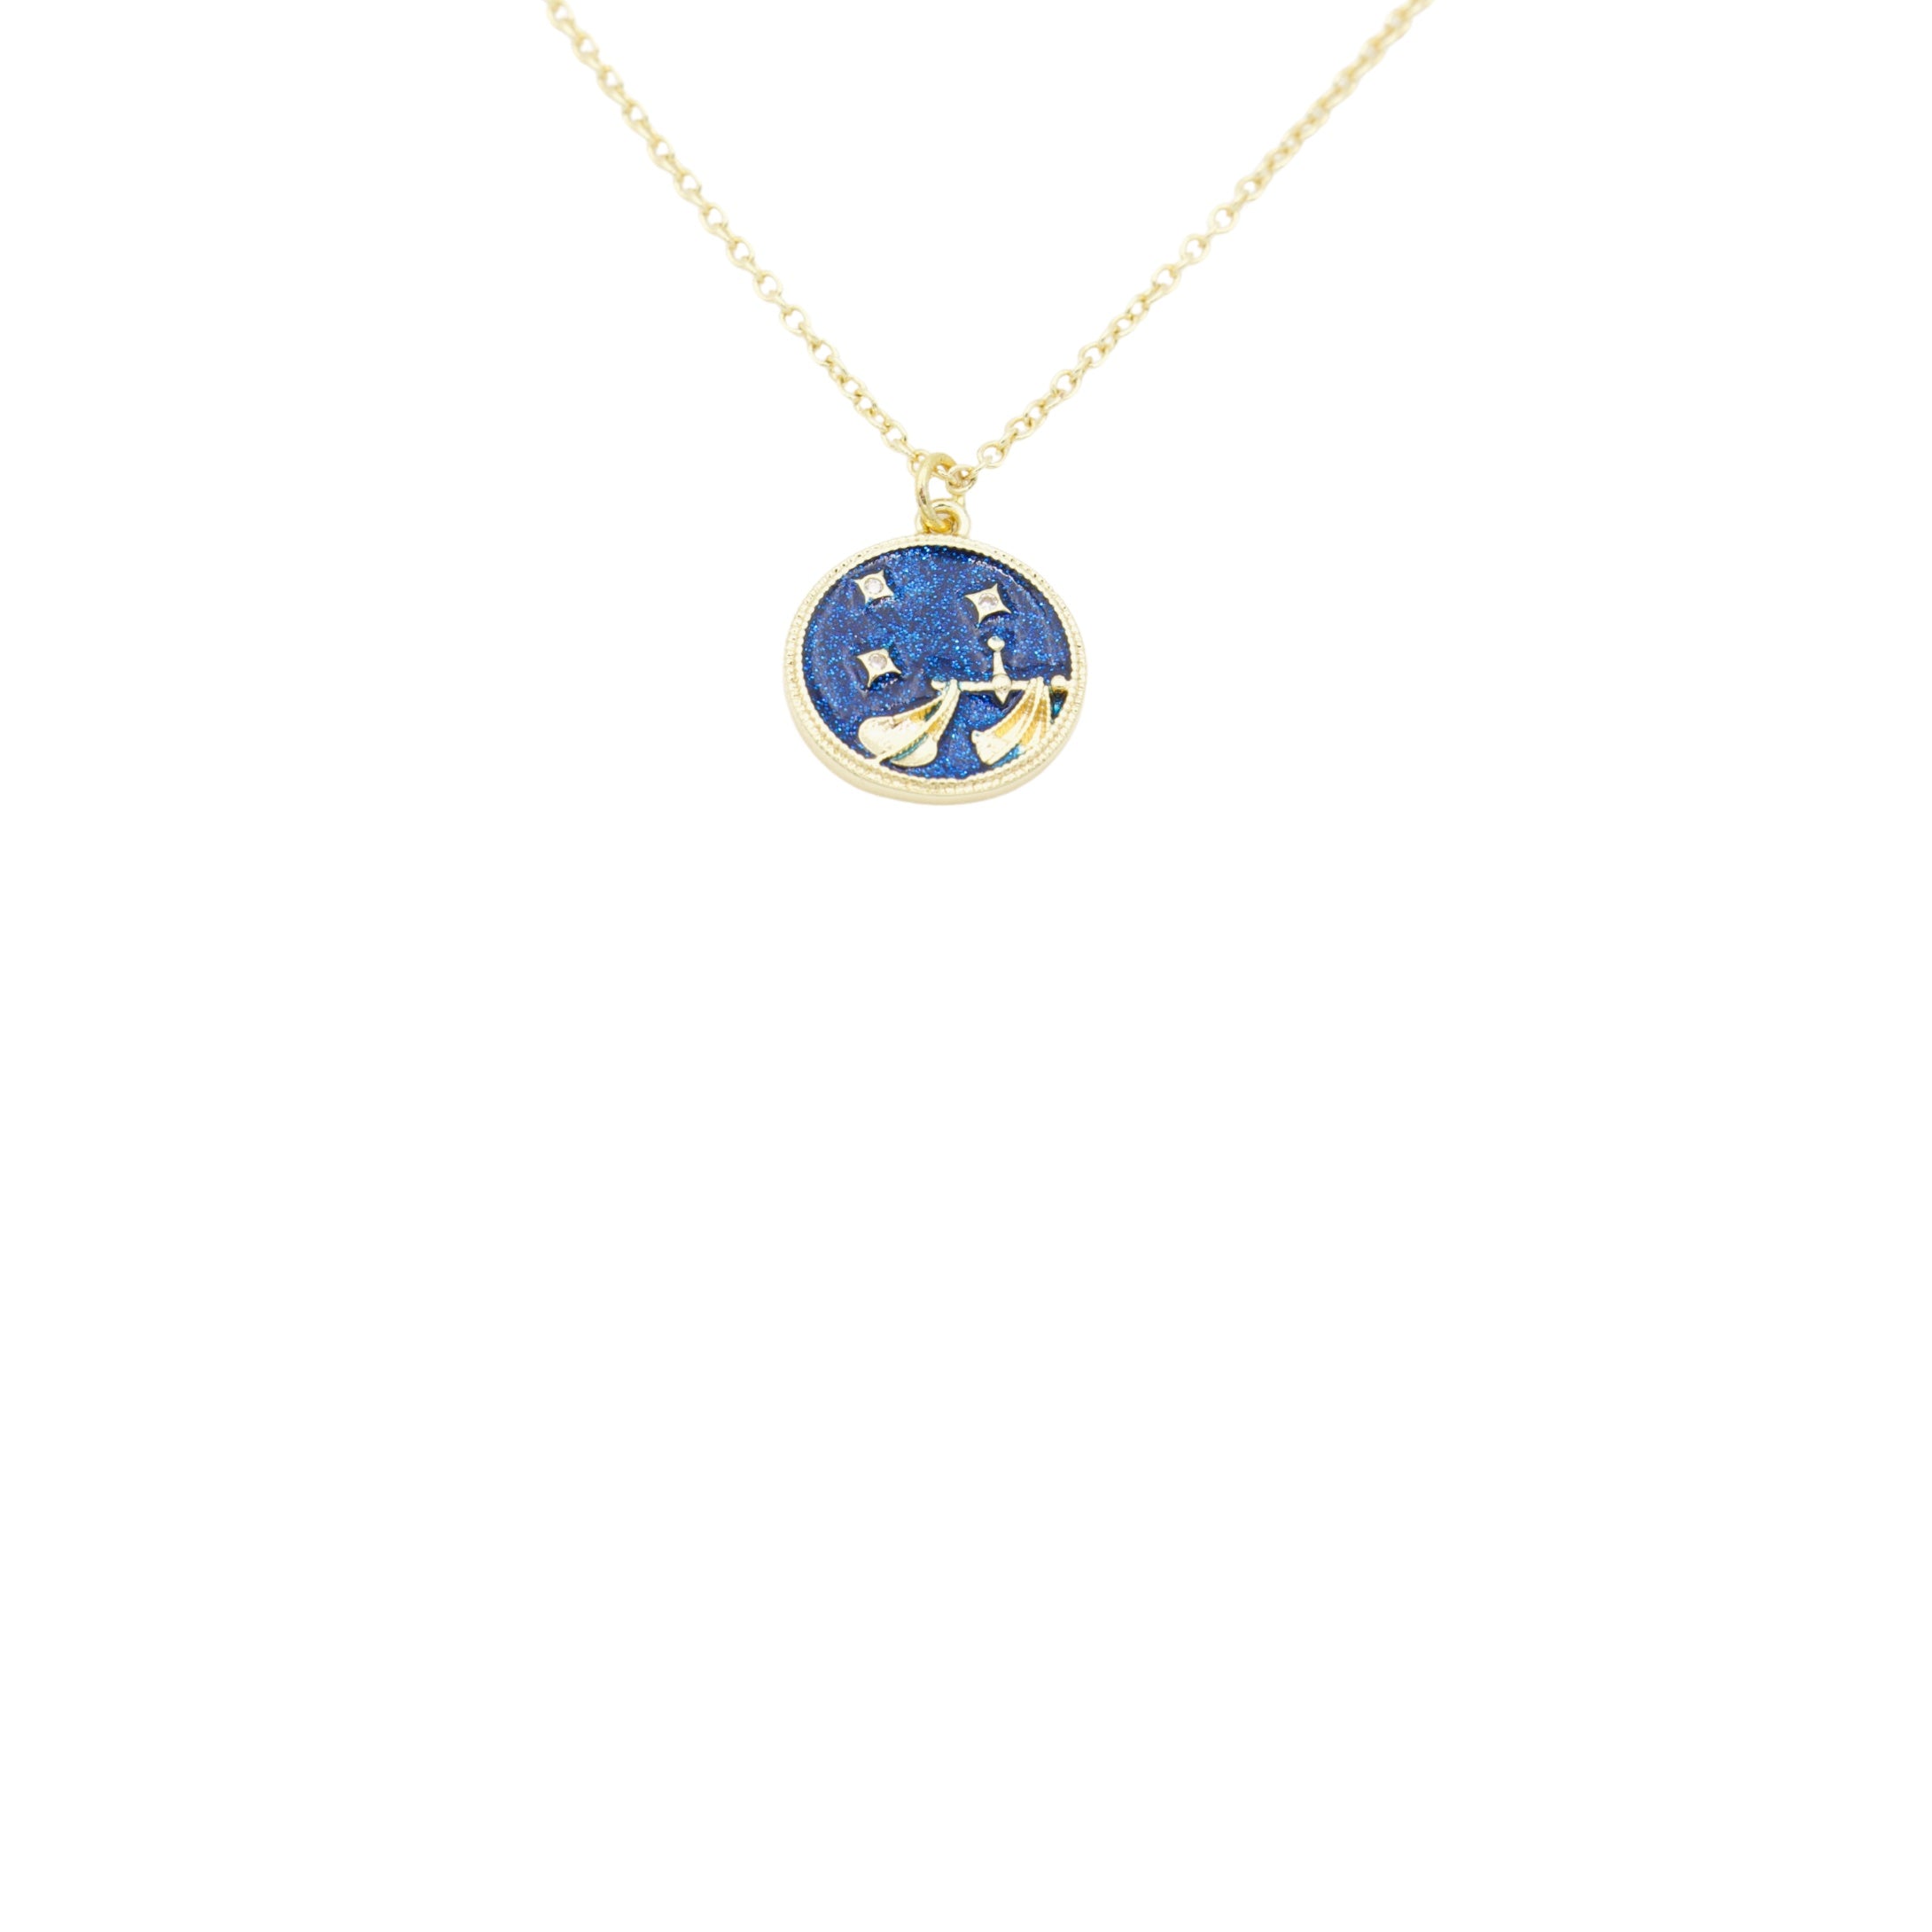 AW Boutique's Zodiac Astro Coin is a dainty pendant full of sparkle and shine.  This piece adds a pop of colour to your everyday wear and at 18 inches is a great length to mix and layer your other chains with.  Proudly wear either your own star sign or the star sign of a loved one close to your heart.  Zodiac shown is Libra.